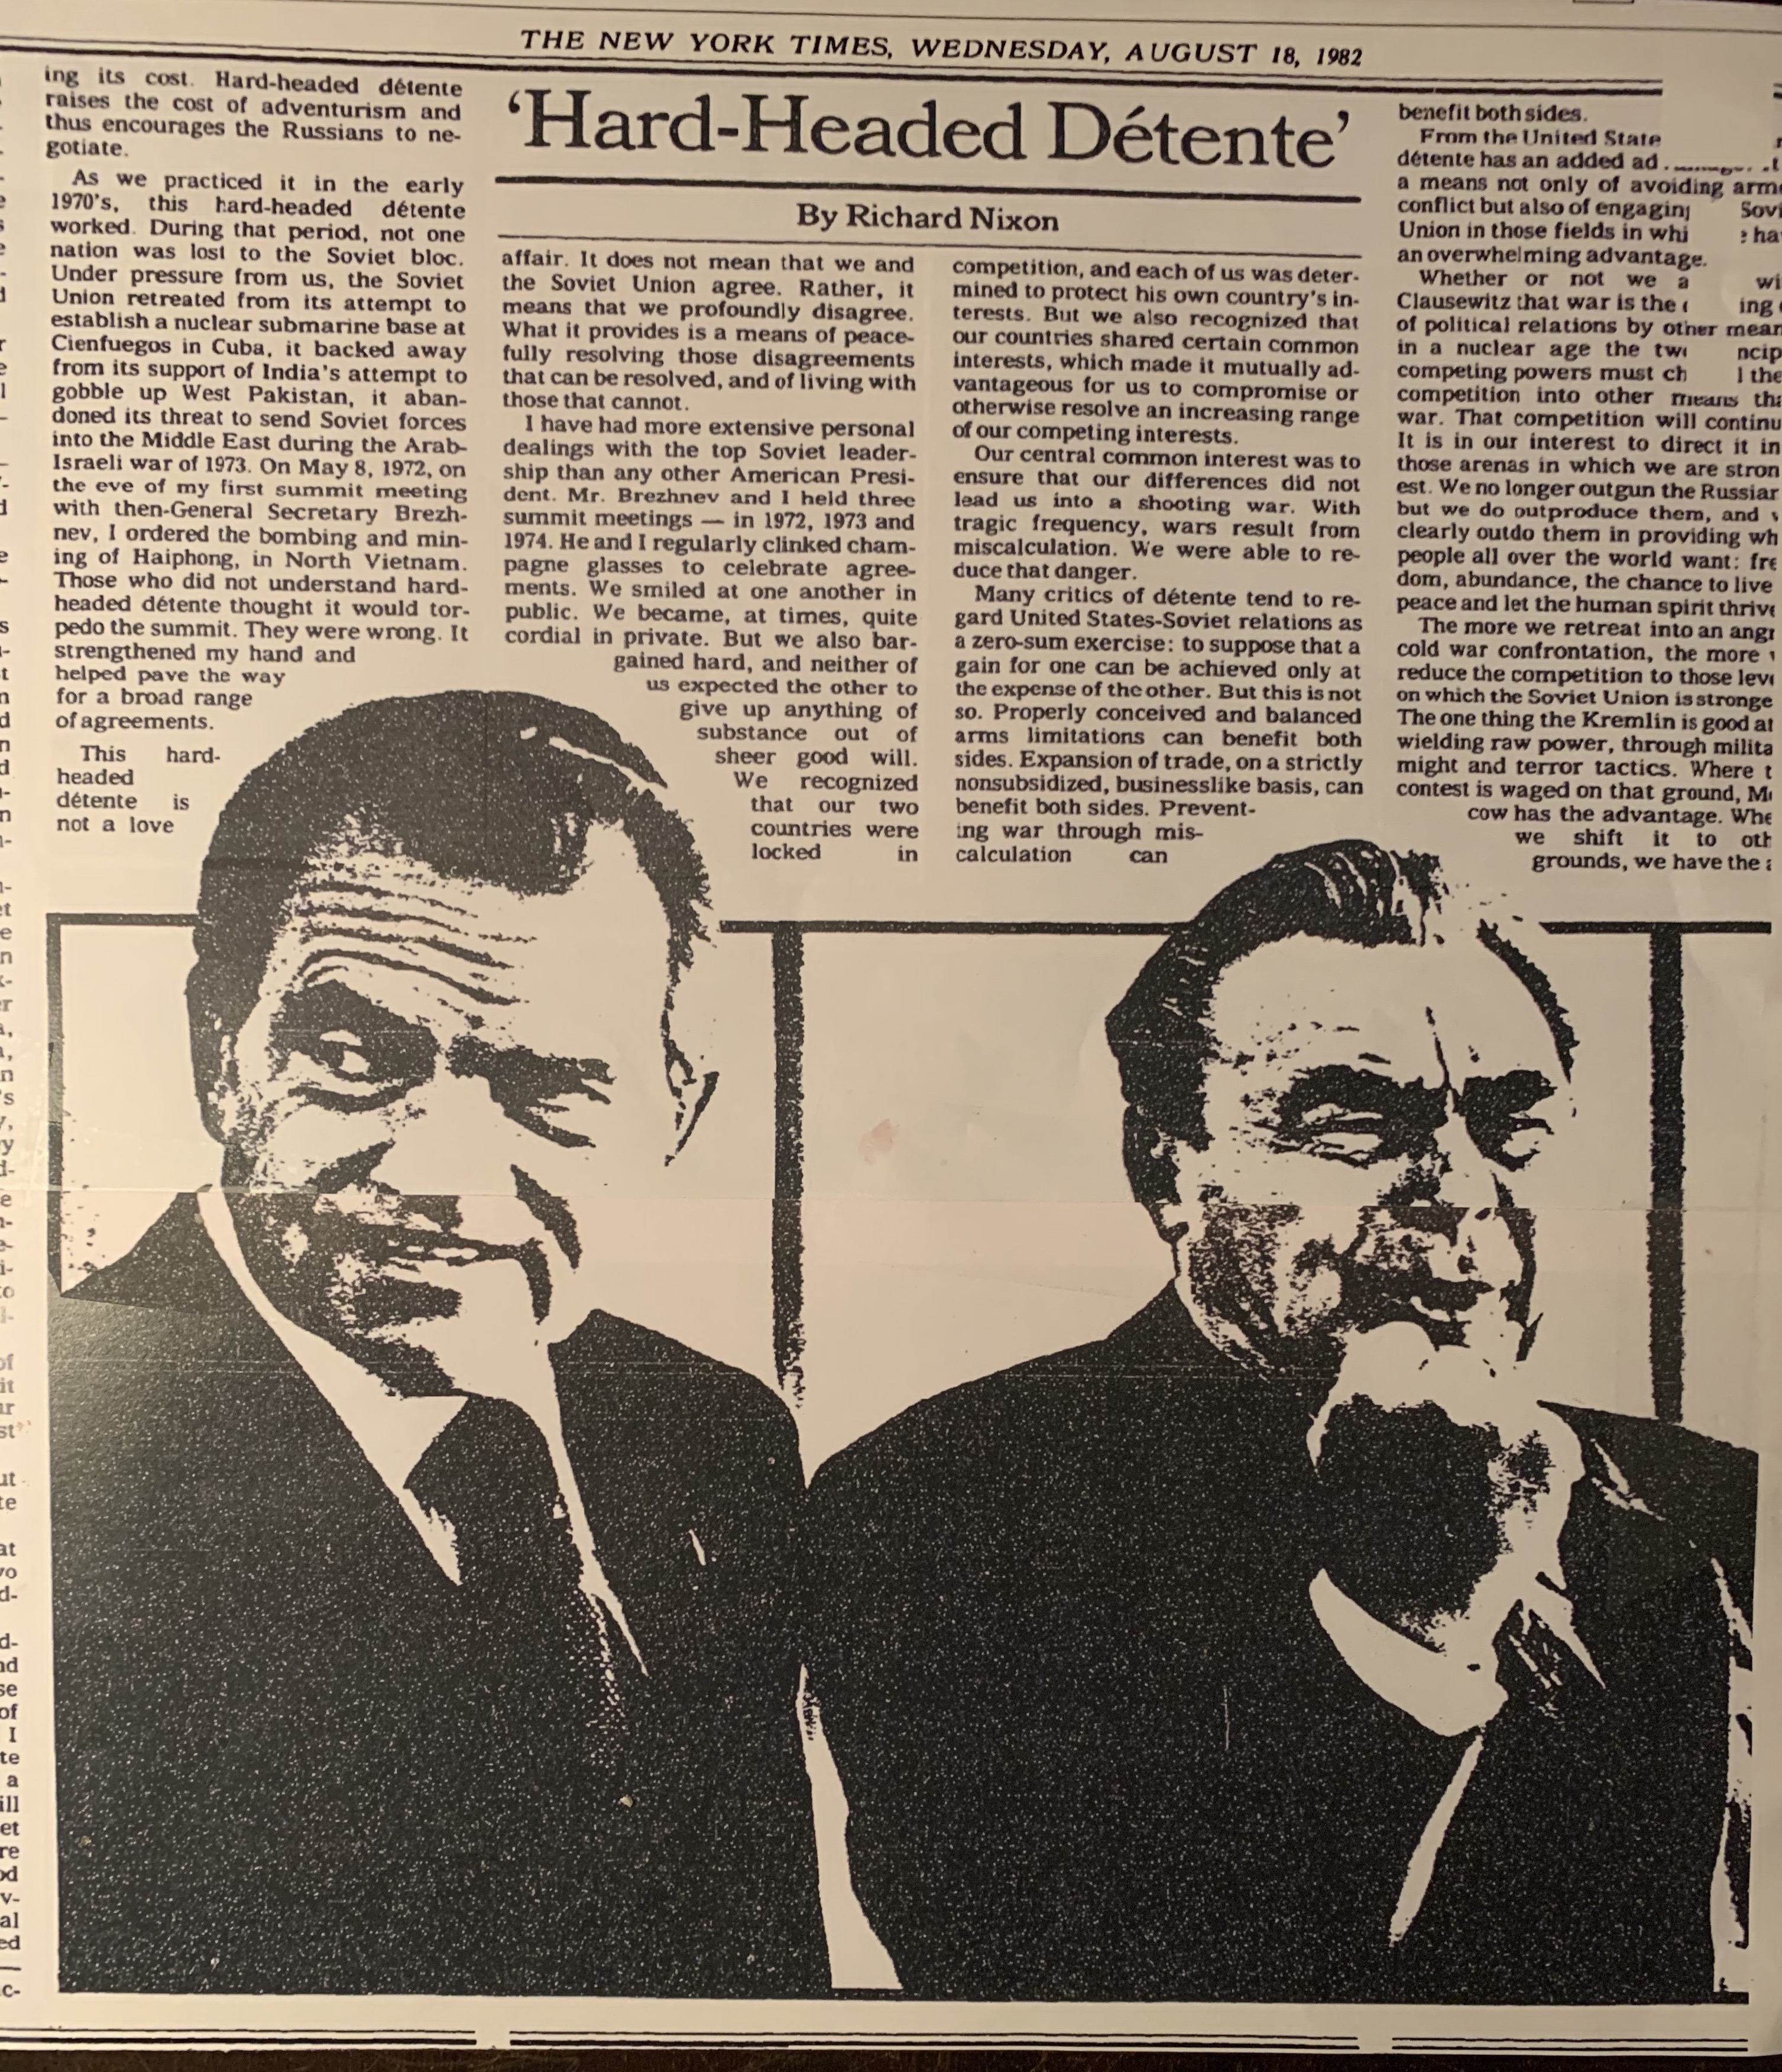 New York Times article about detente written by Nixon in 1982.